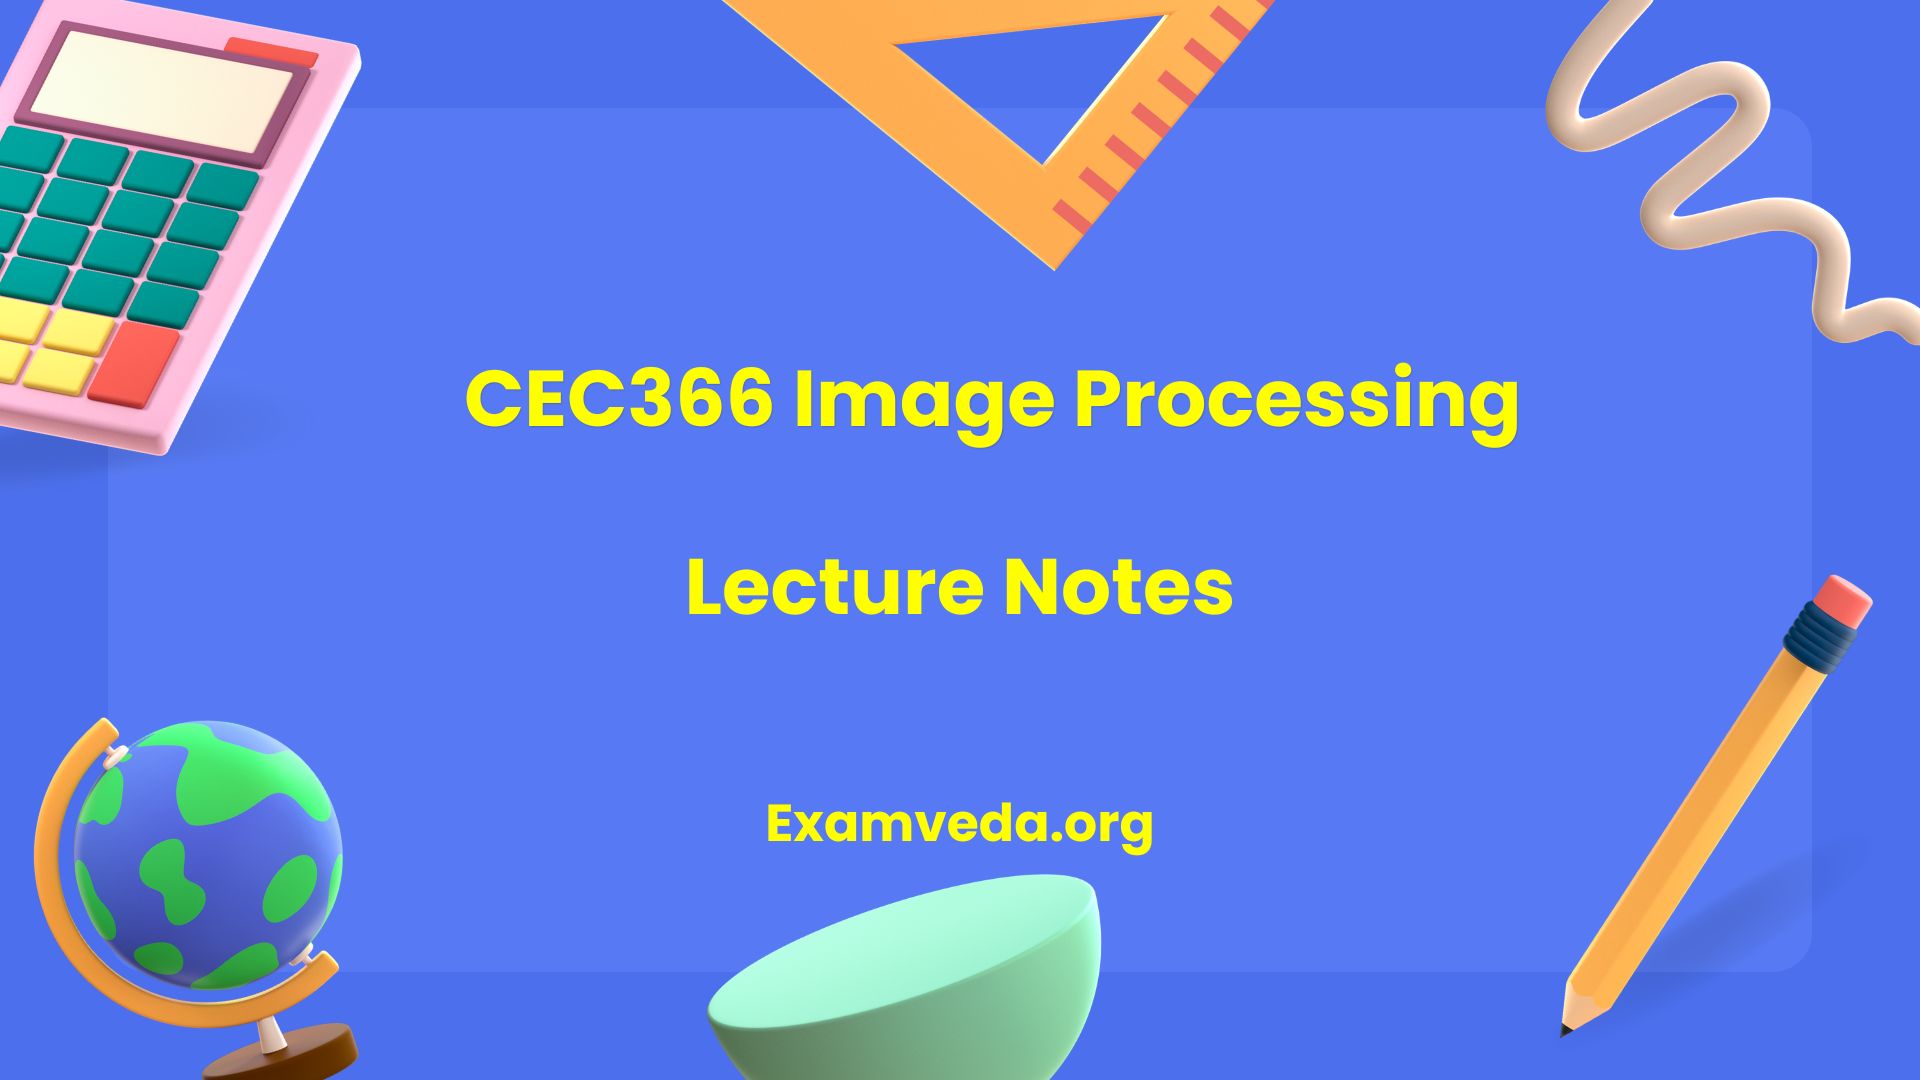 CEC366 Image Processing Lecture Notes